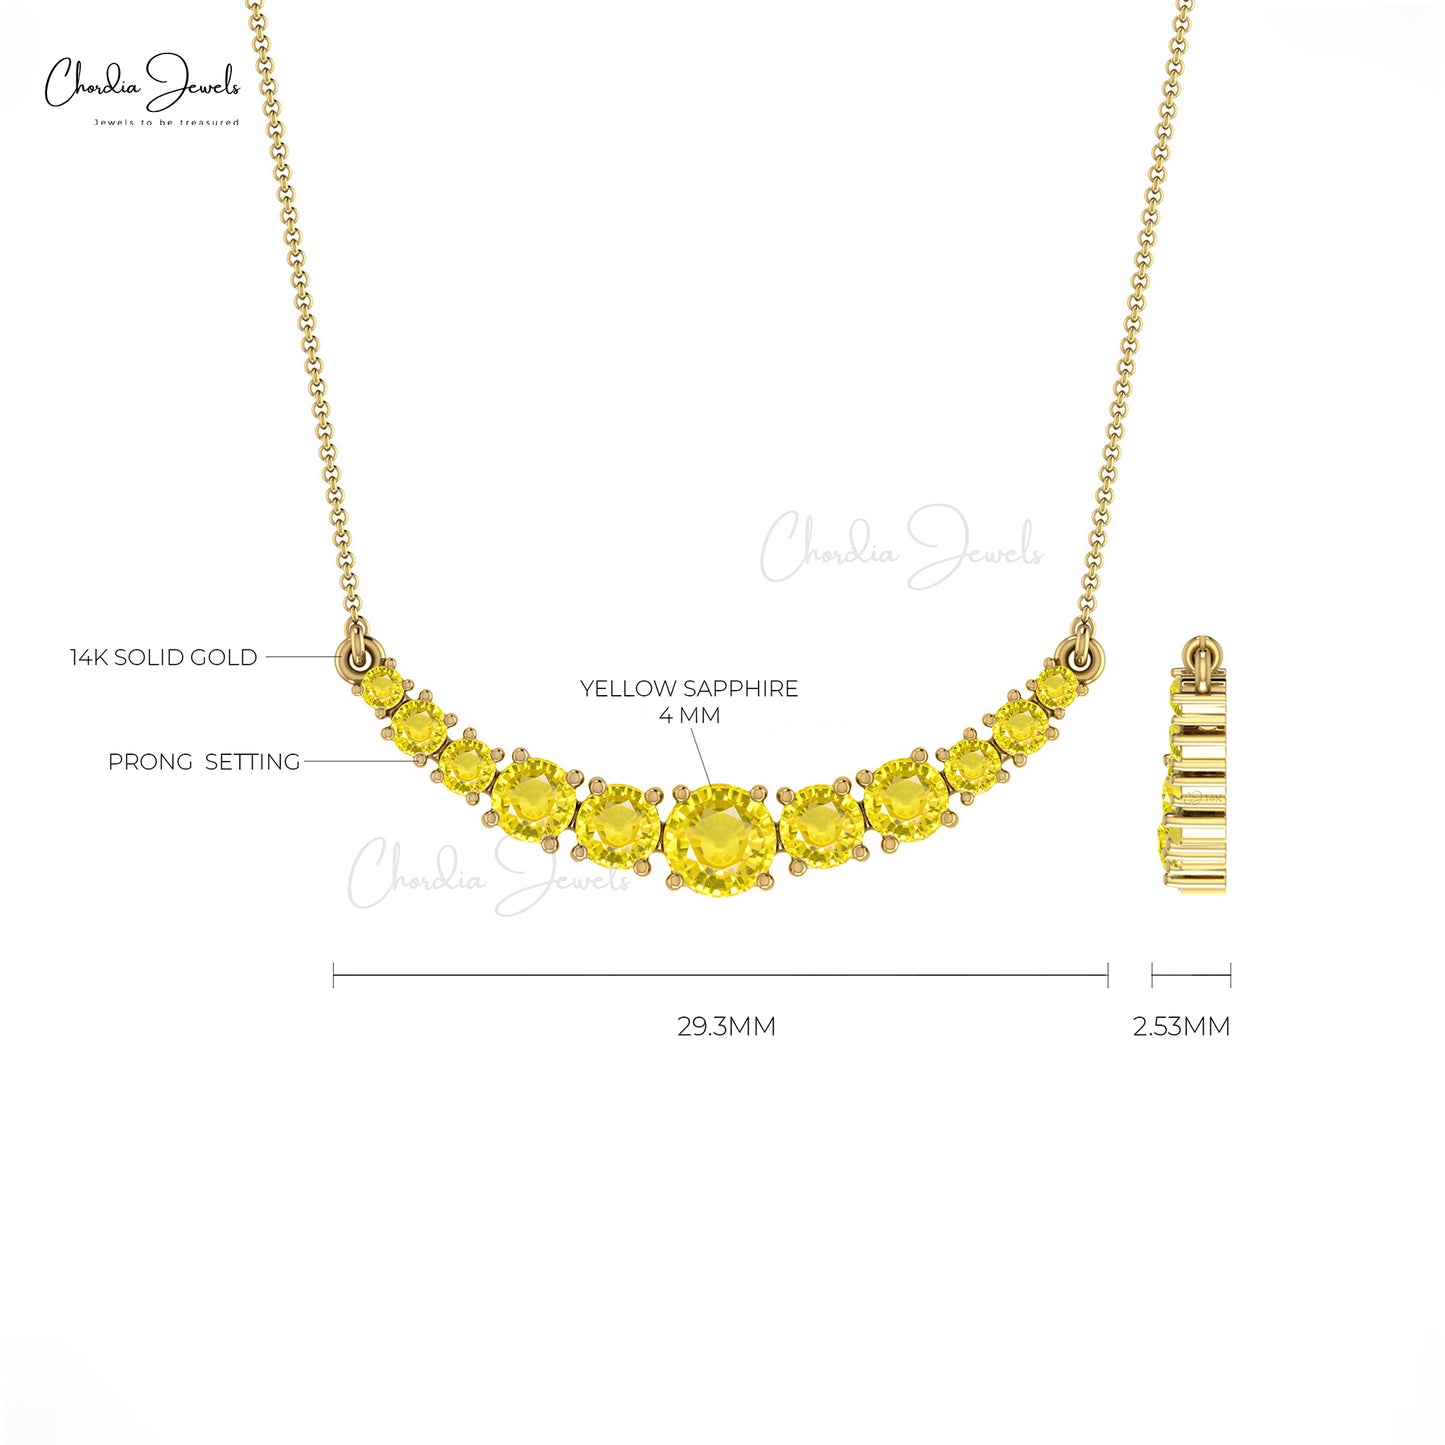 Load image into Gallery viewer, 14k Solid Gold Statement Necklace, Natural Yellow Sapphire Necklace, 1.19 Carat Round Faceted September Birthstone Necklace, Wedding Necklace Gift for Her
